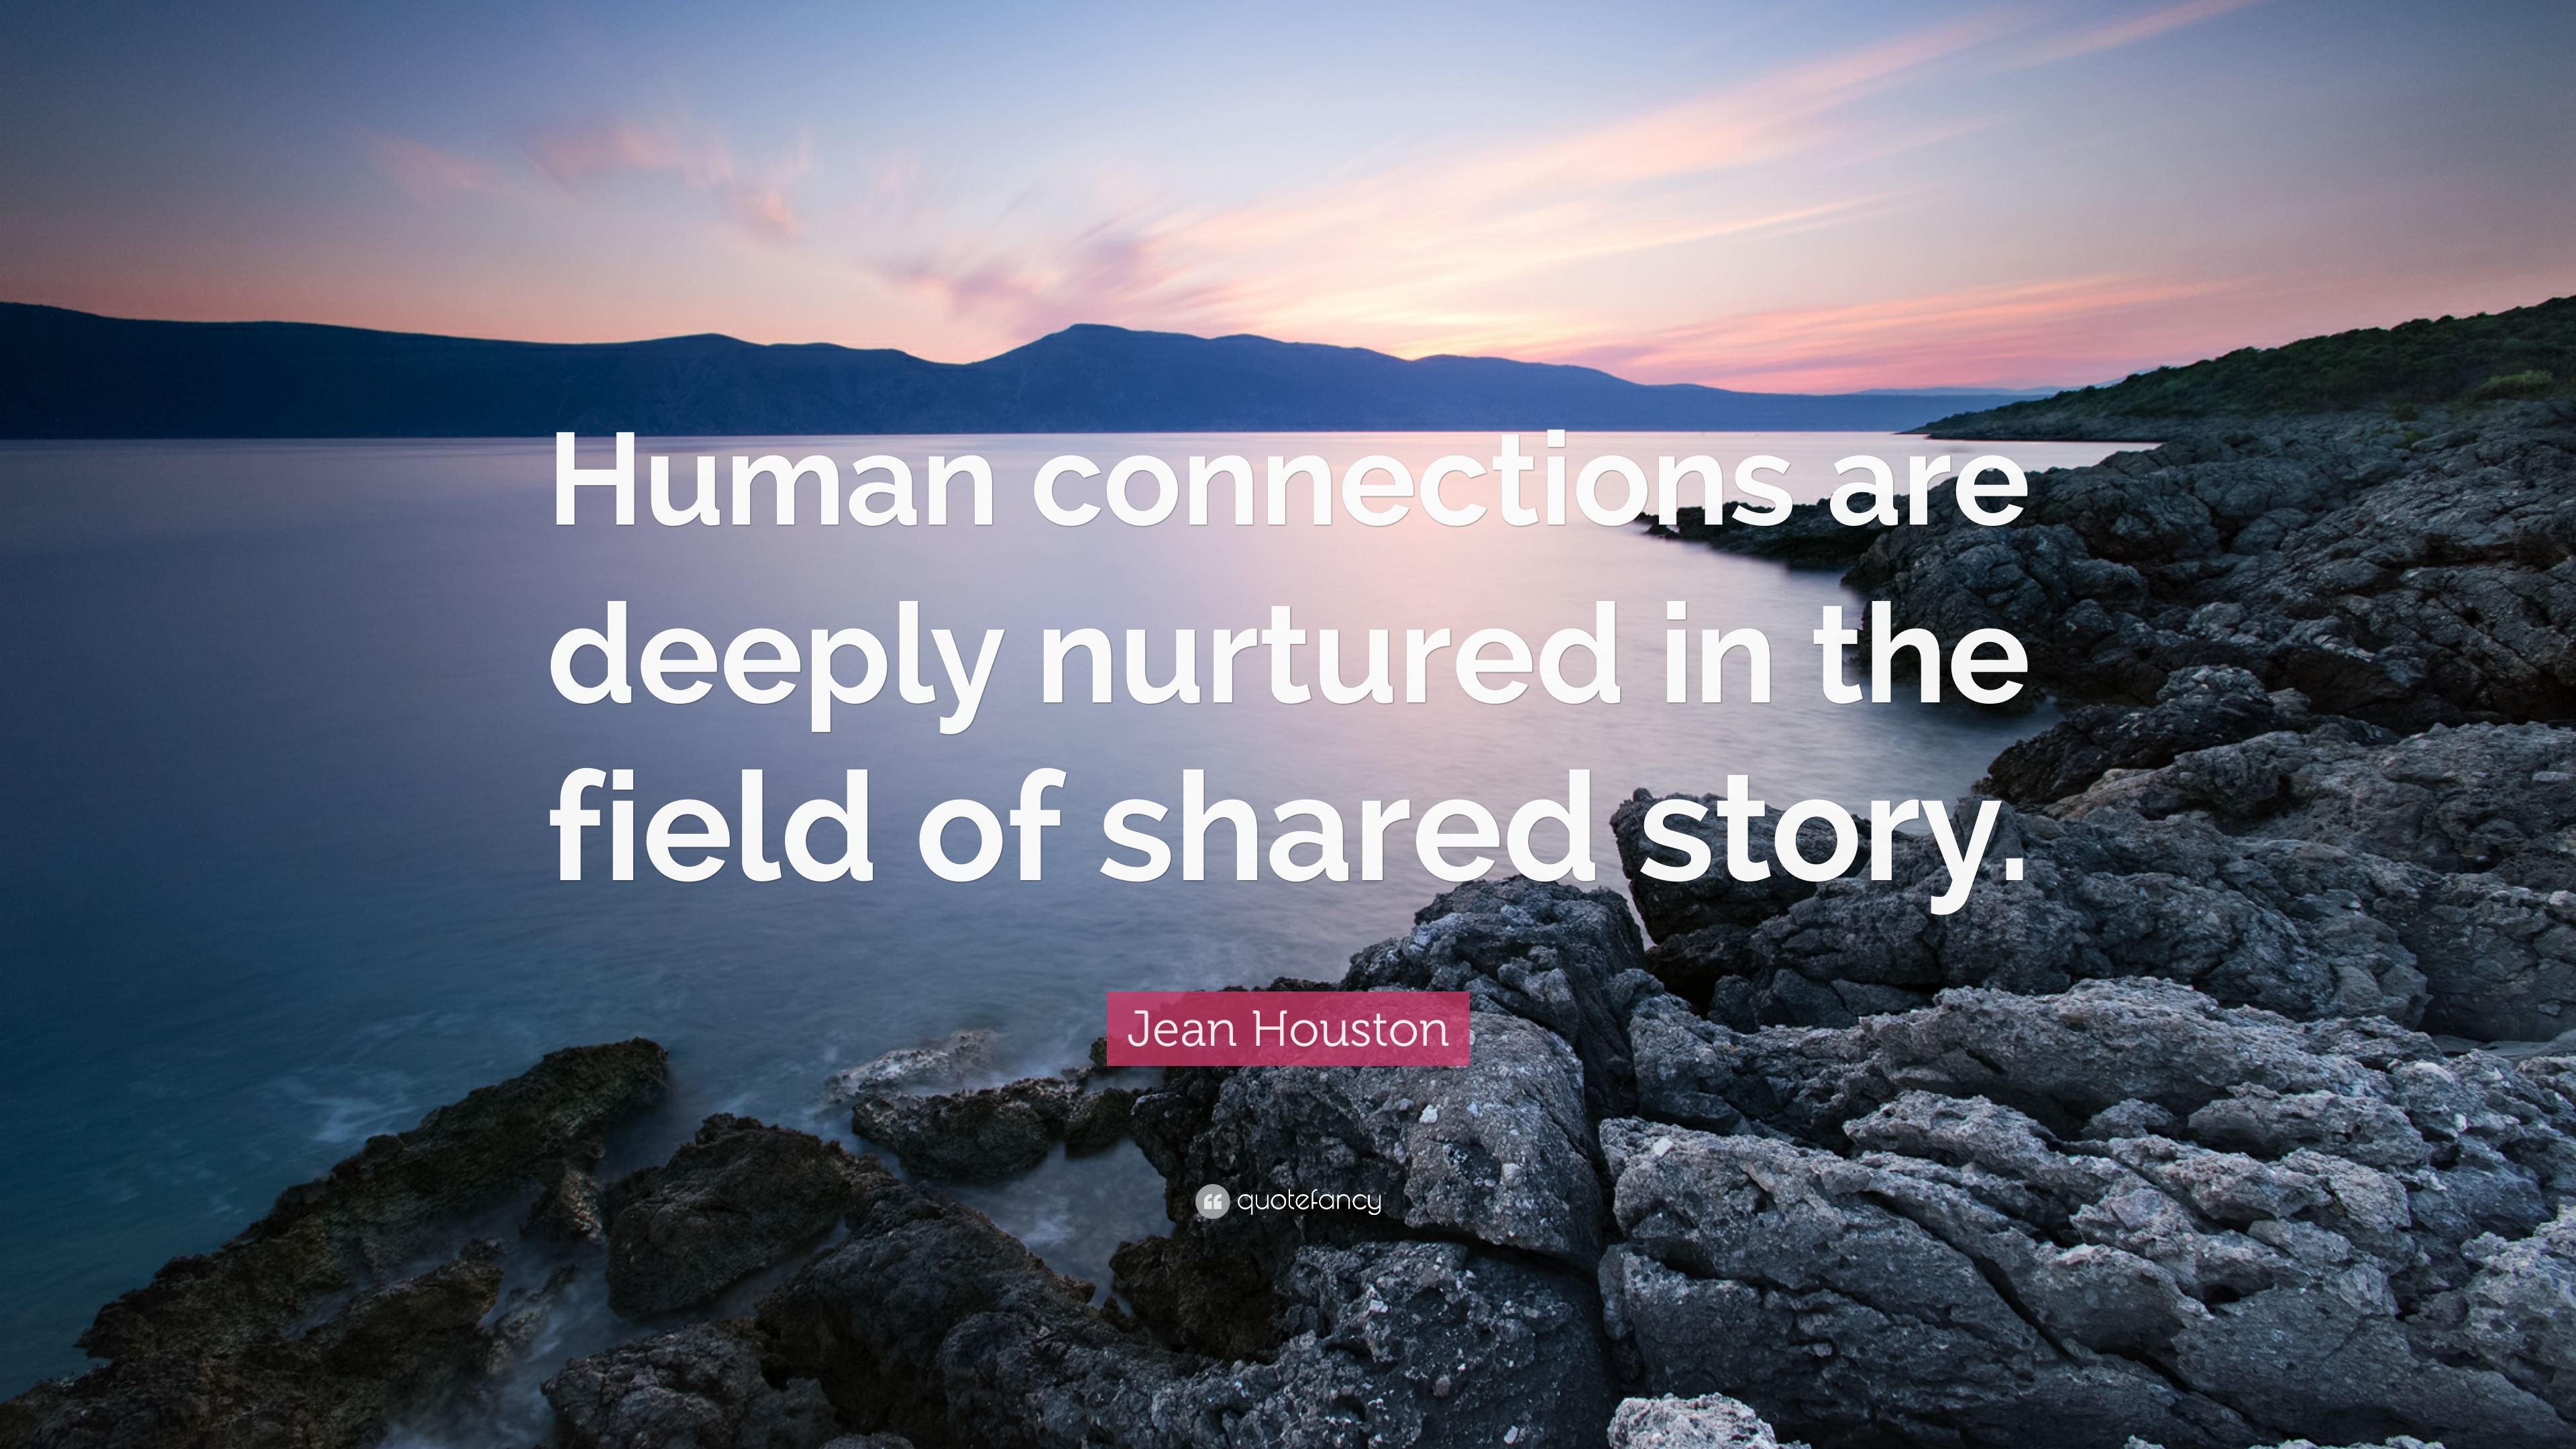 Jean Houston Quote “Human connections are deeply nurtured